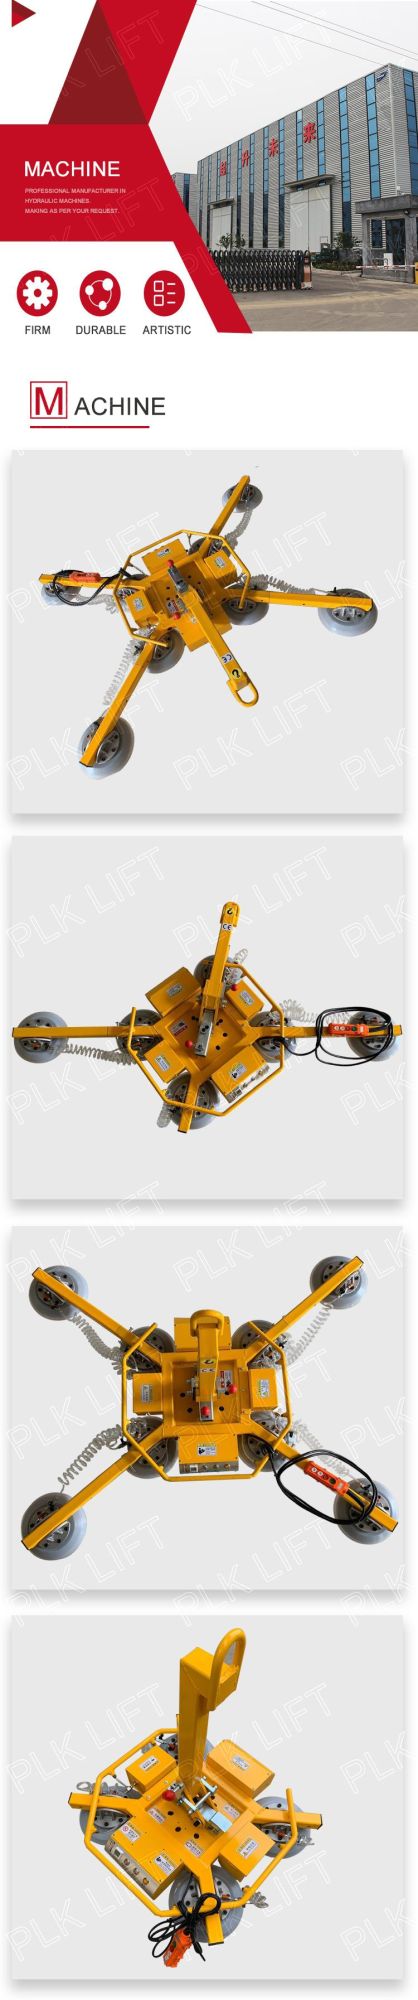 800kg Vacuum Lifting Equipment Vacuum Lifter with 8 Suction Cups